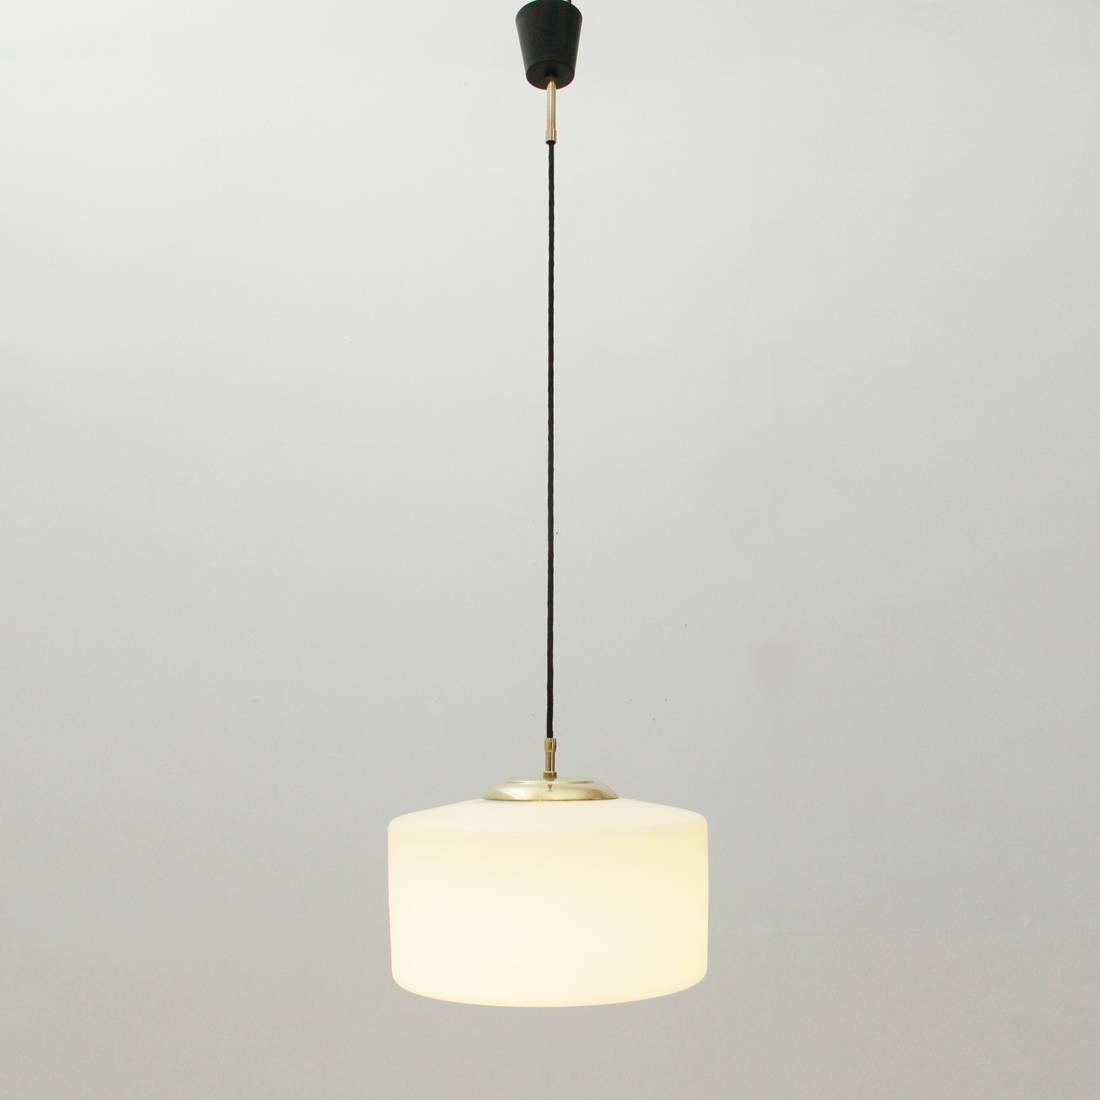 Italian manufacture chandelier from the 1950s.
Rosette in black painted aluminium and brass.
Diffuser in white opal glass and brass.
Good general conditions, some signs due to normal use over time.

Dimensions: Height 160 cm, diameter 32